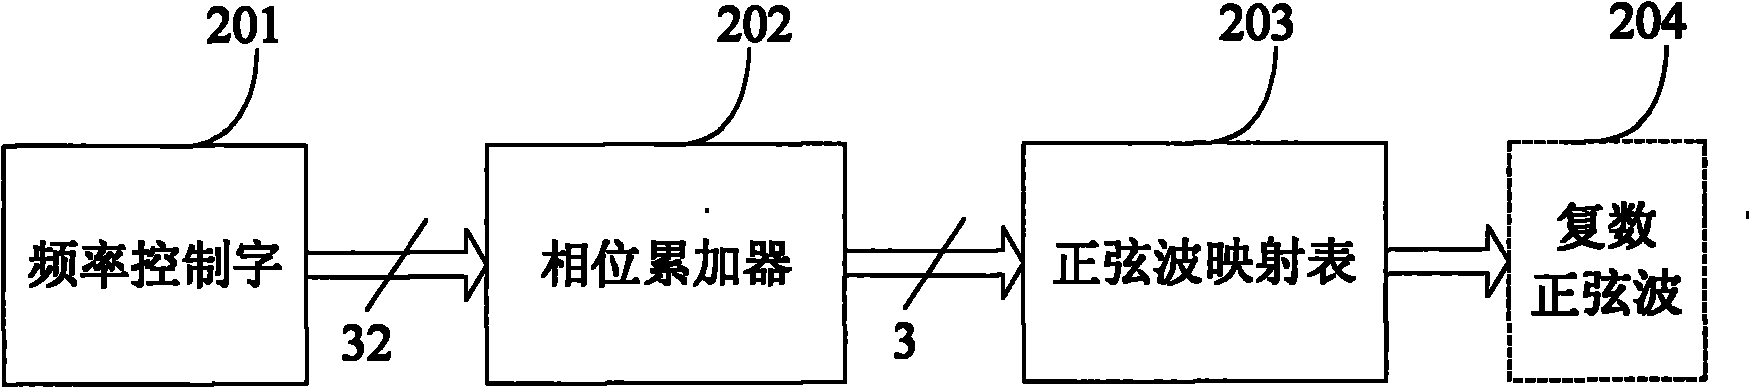 Multi-satellite navigation system compatible GNSS (Global Navigation Satellite System) signal receiving method and correlator thereof